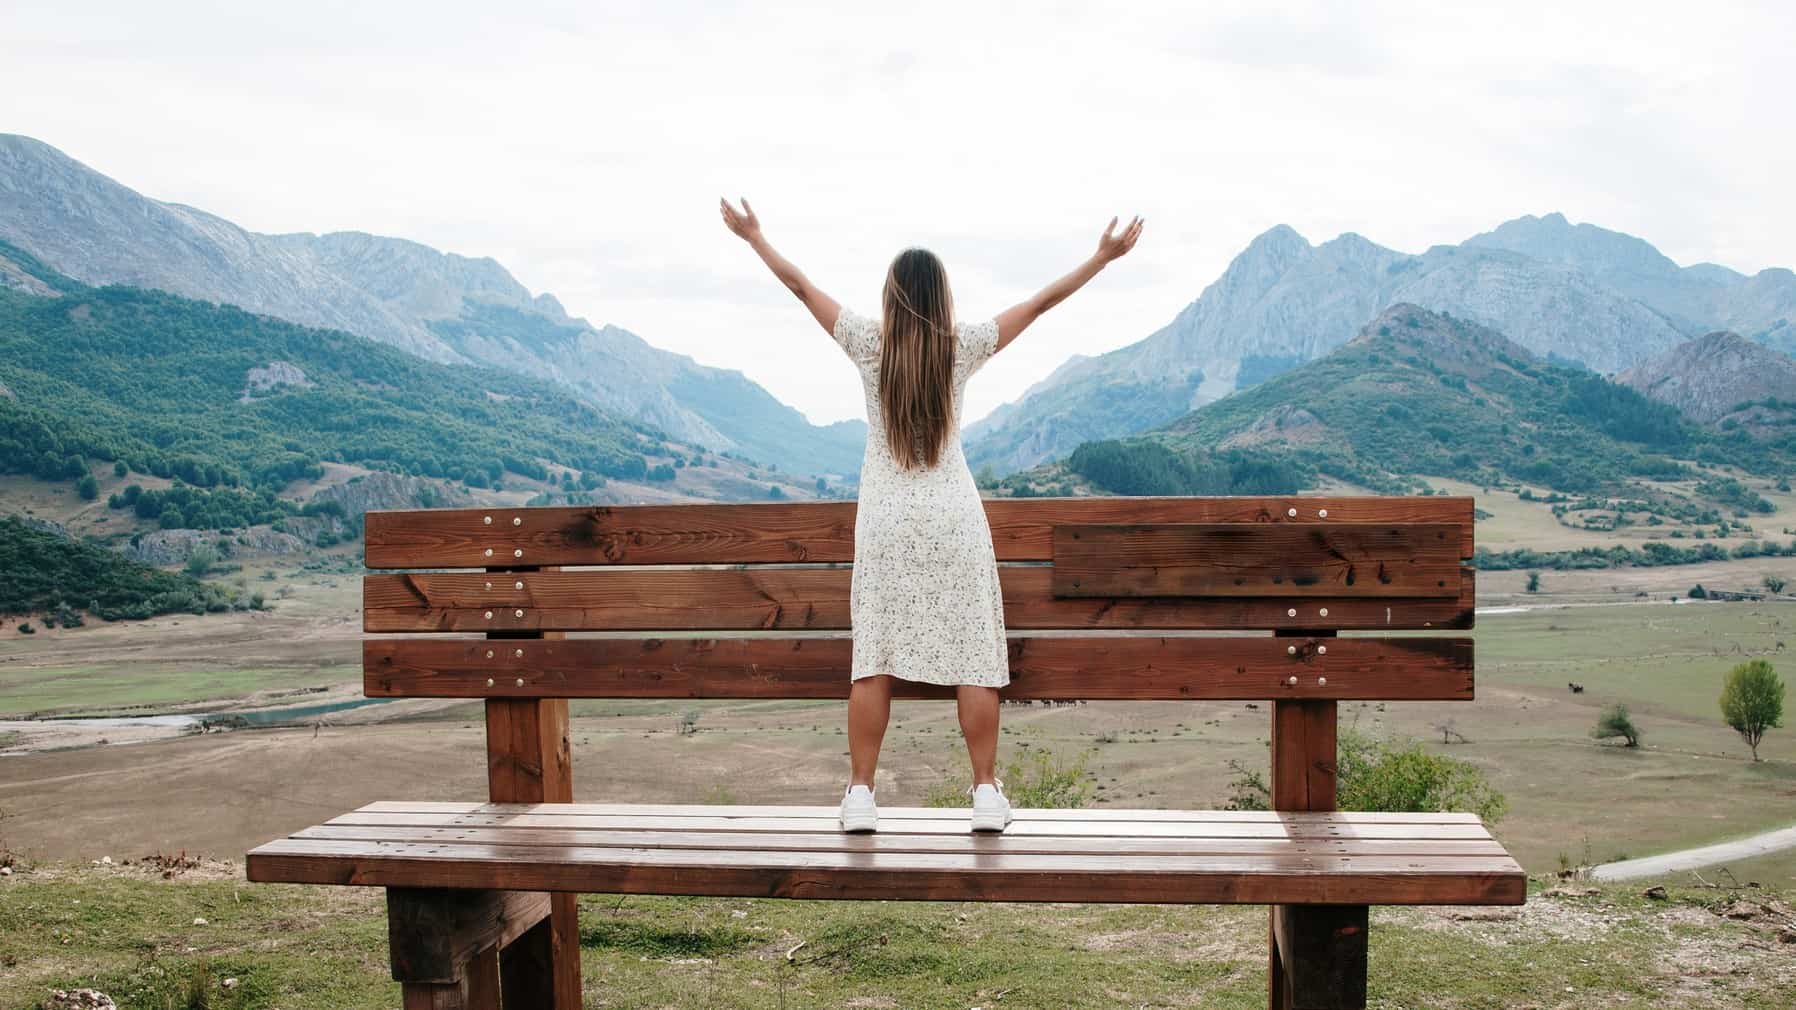 A woman stands on a huge oversized wooden park bench with her arms outstretched towards the mountainous horizon in the distance.